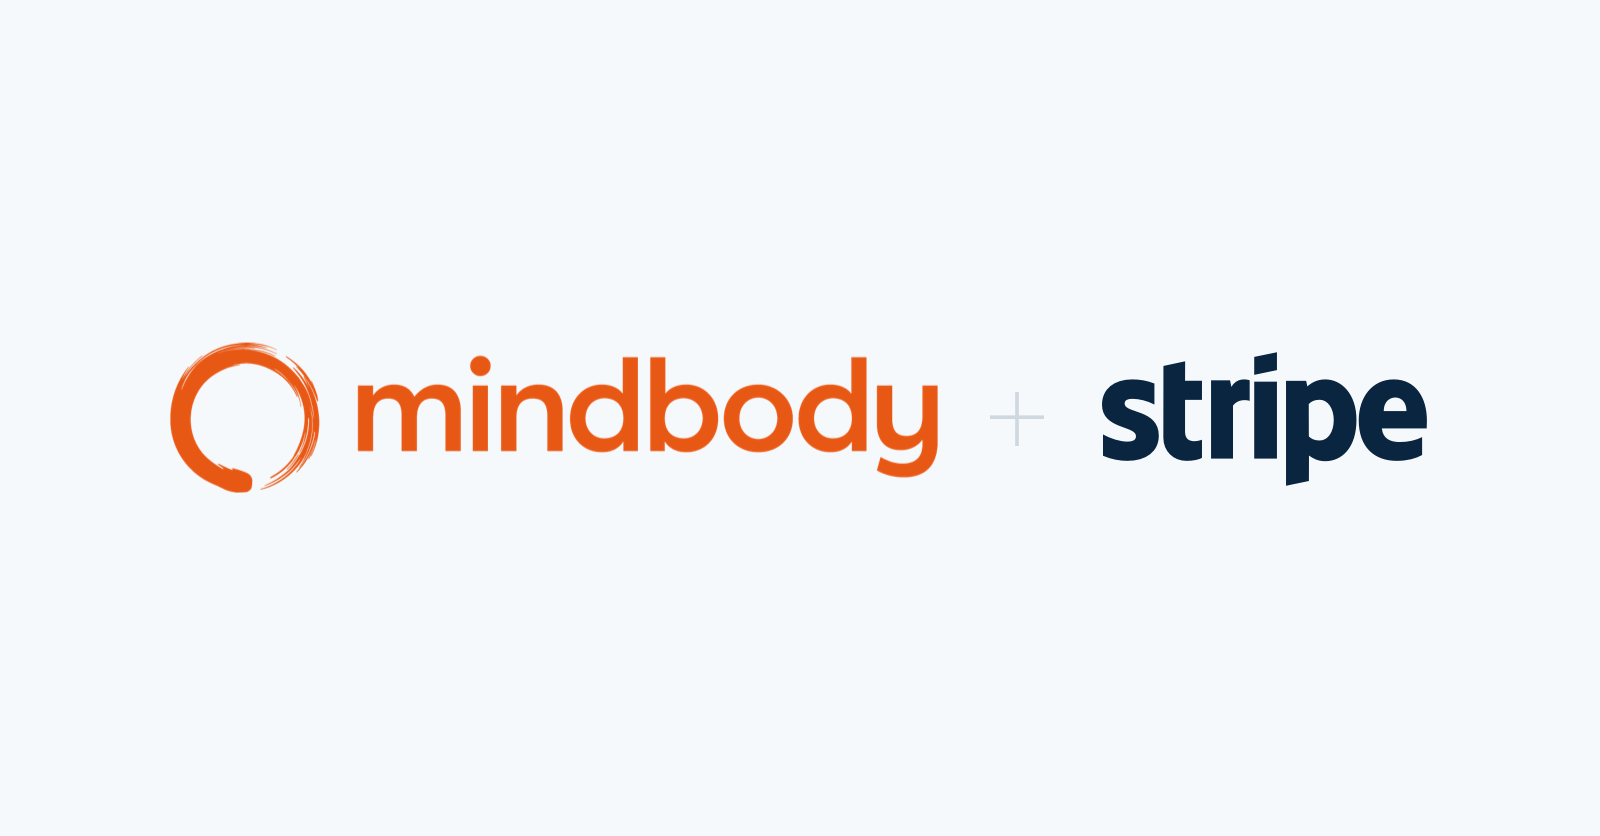 Mindbody teams up with Stripe to fuel expansion in North America